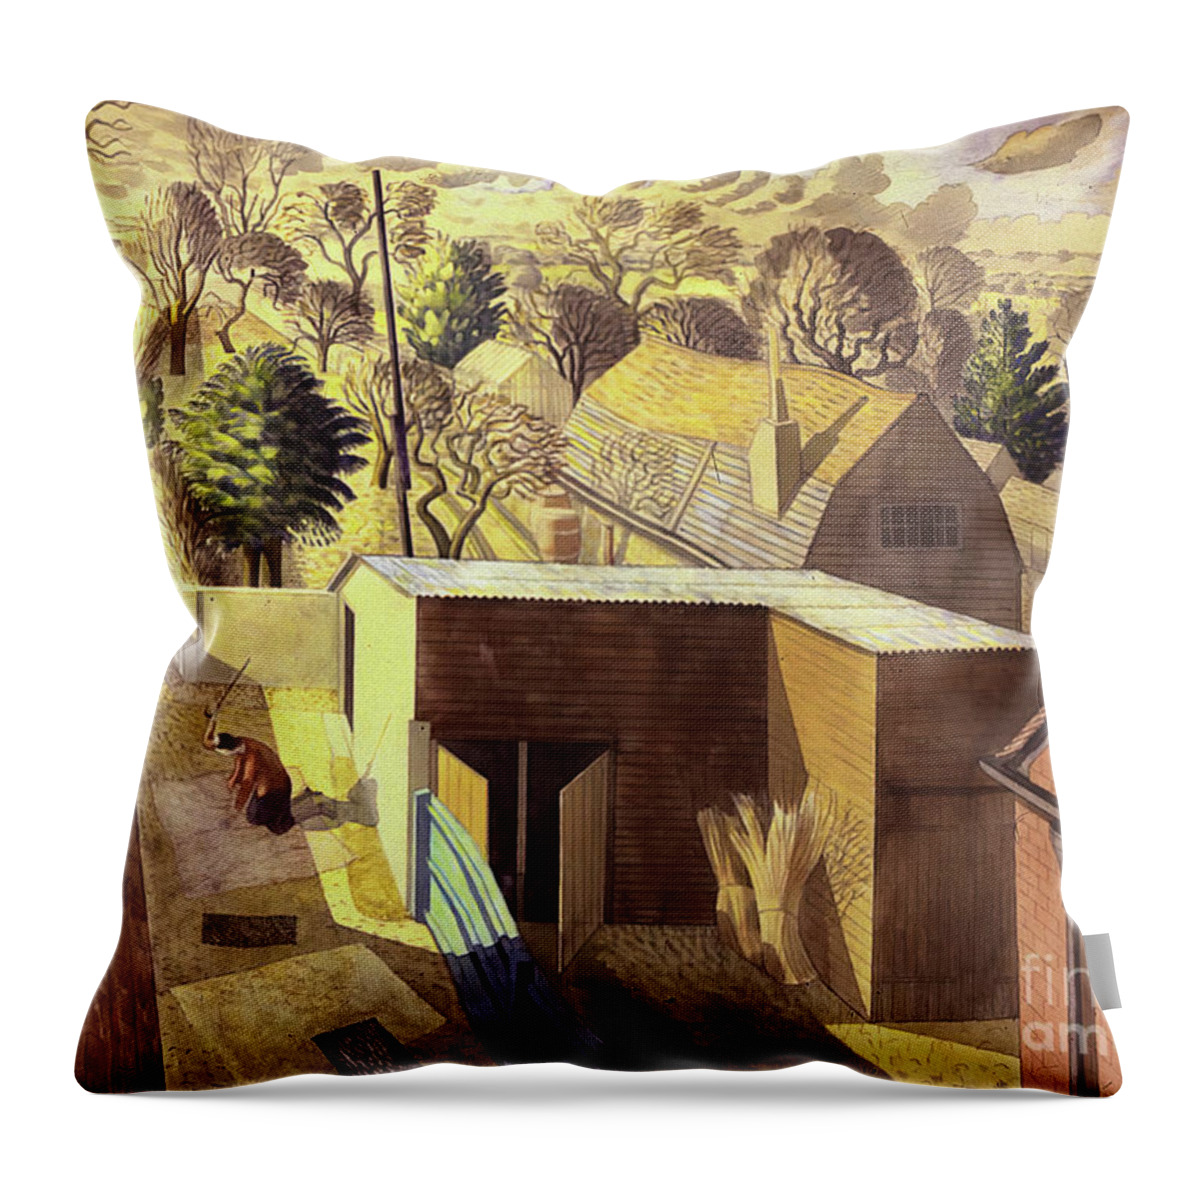 Cc0 Throw Pillow featuring the photograph Brick Farm Great Bardfield Essex by ERIC RAVILIOUS by Jack Torcello